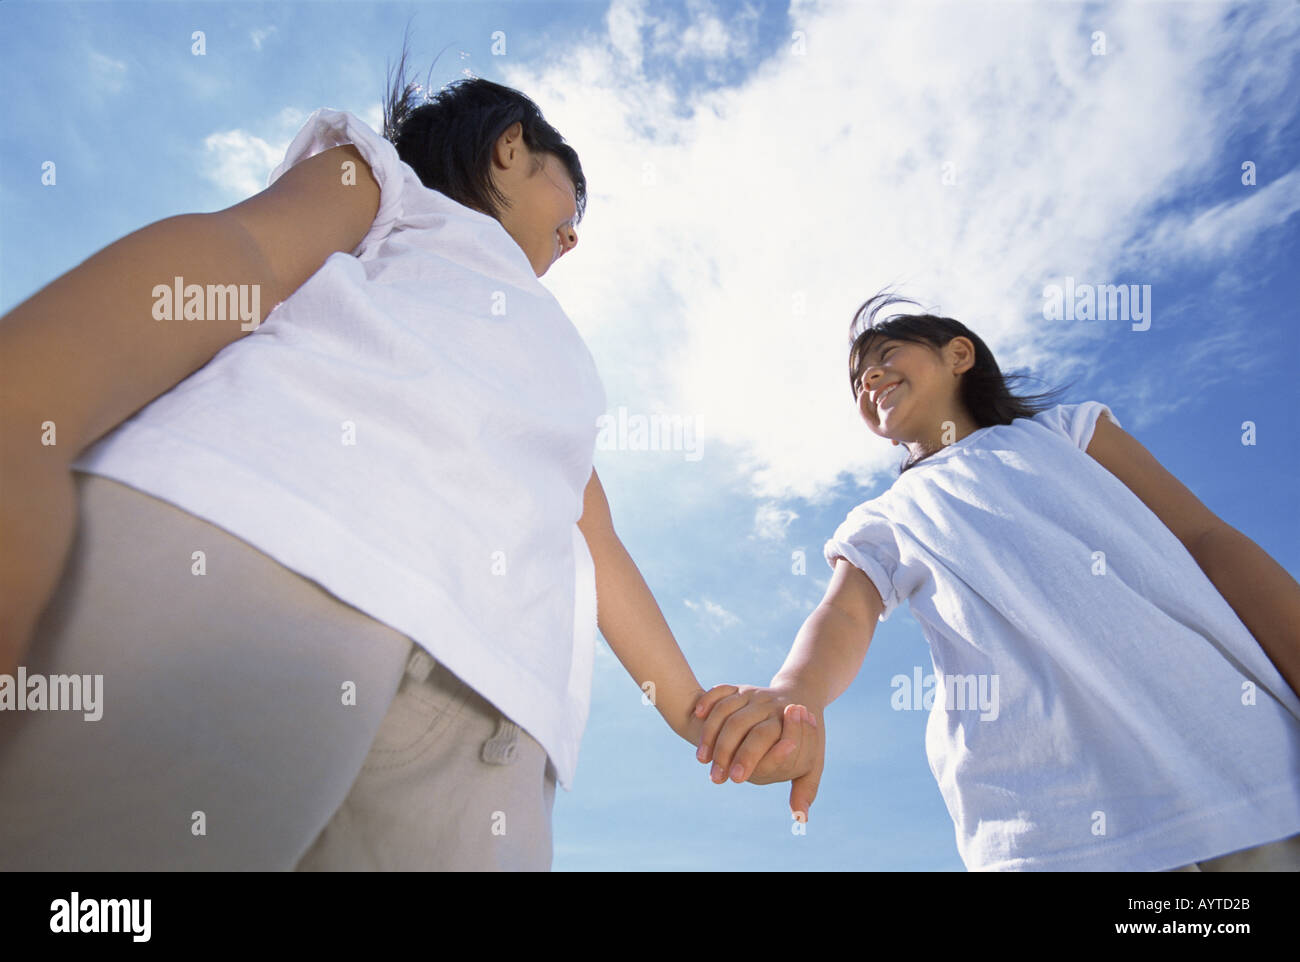 Two girls holding hands smiling at each other Stock Photo